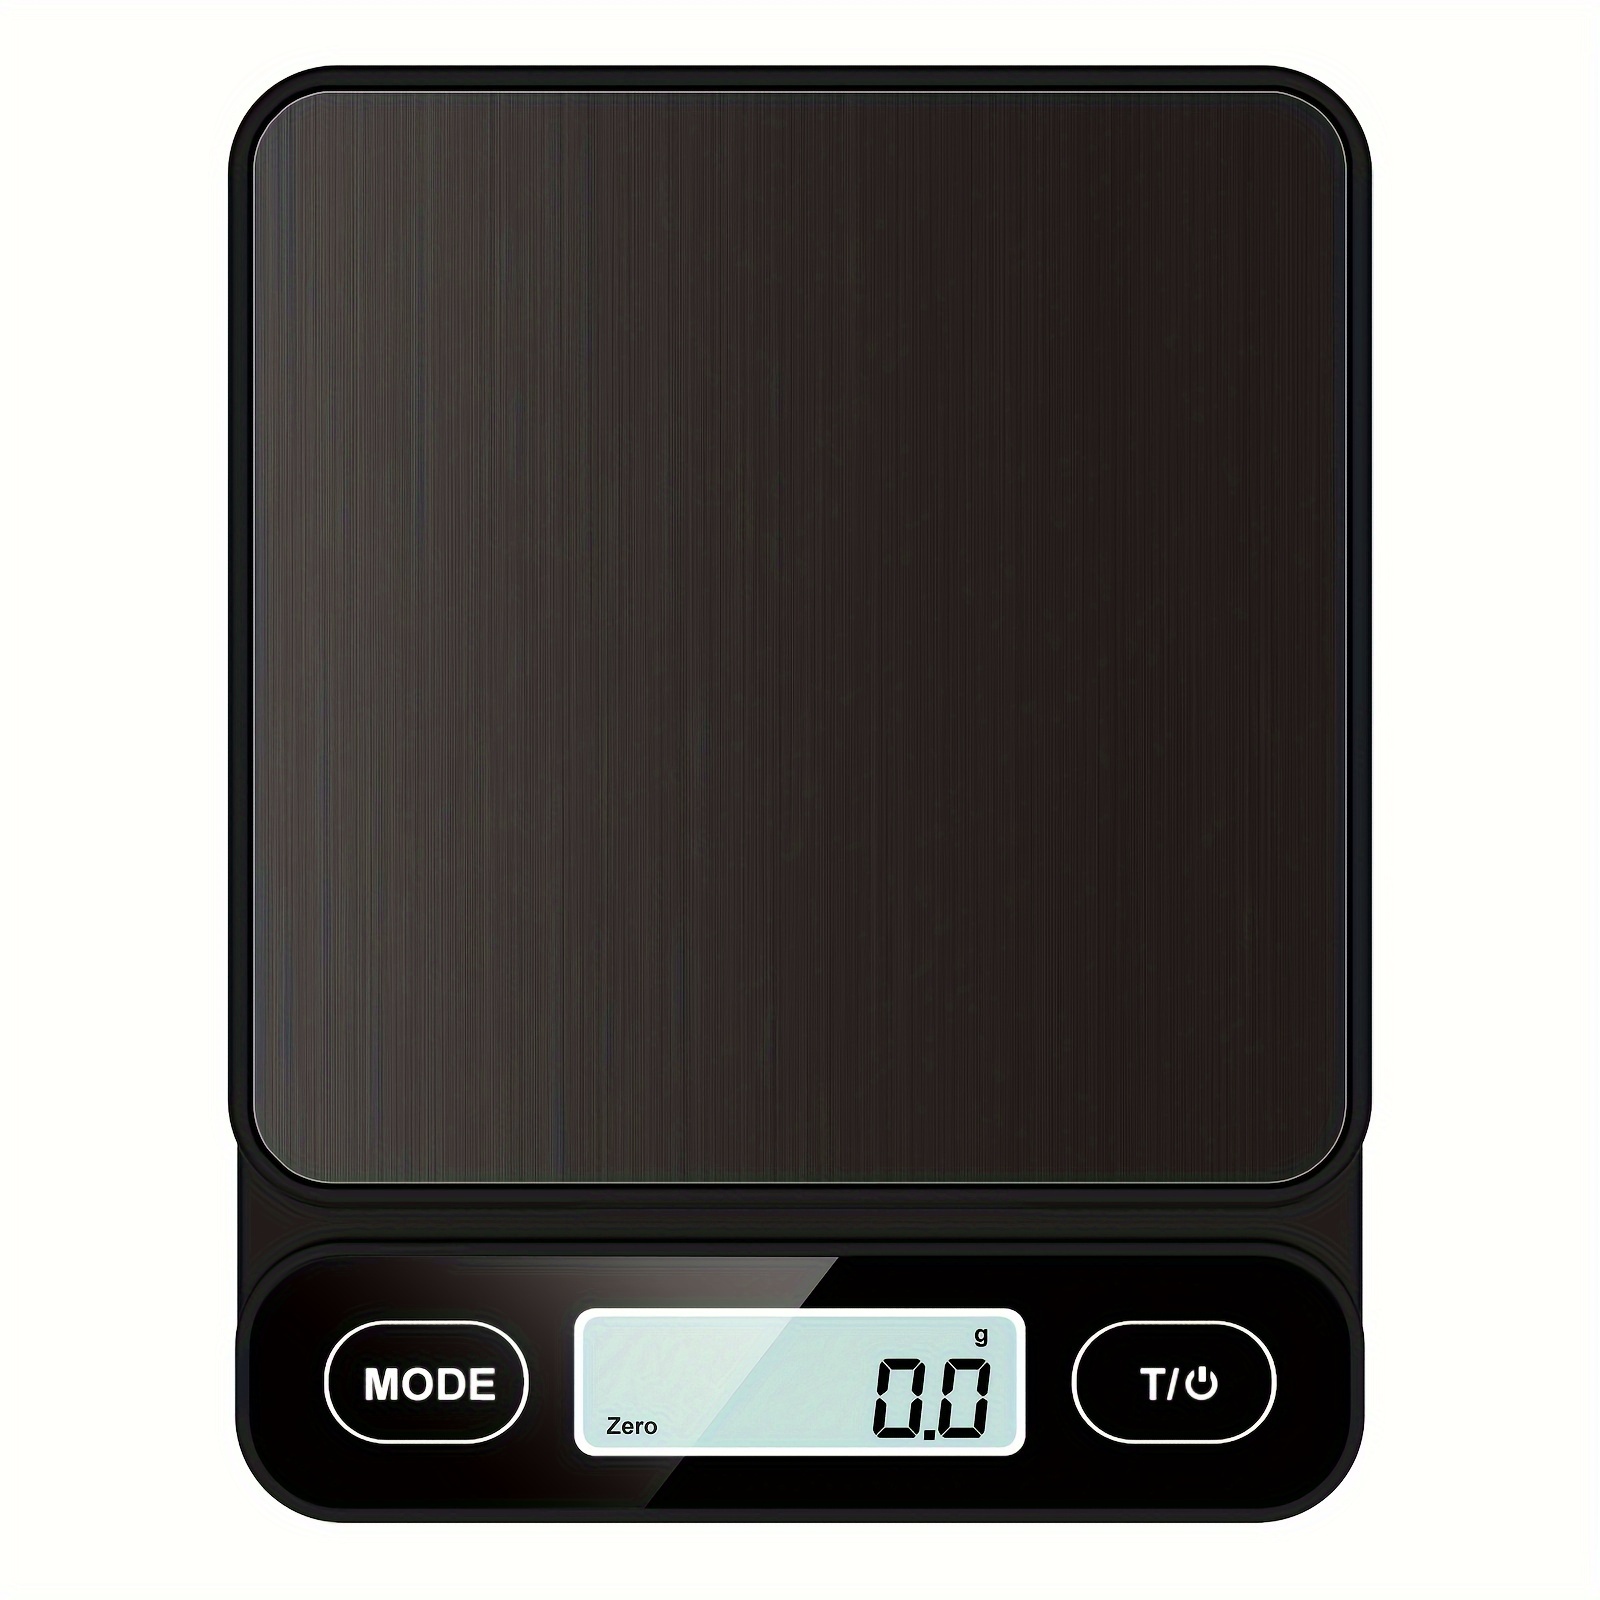 Kitchen Scale 3000g Pocket Food And Backlit Display Digital Jewelry Scale -  Buy Kitchen Scale 3000g Pocket Food And Backlit Display Digital Jewelry  Scale Product on